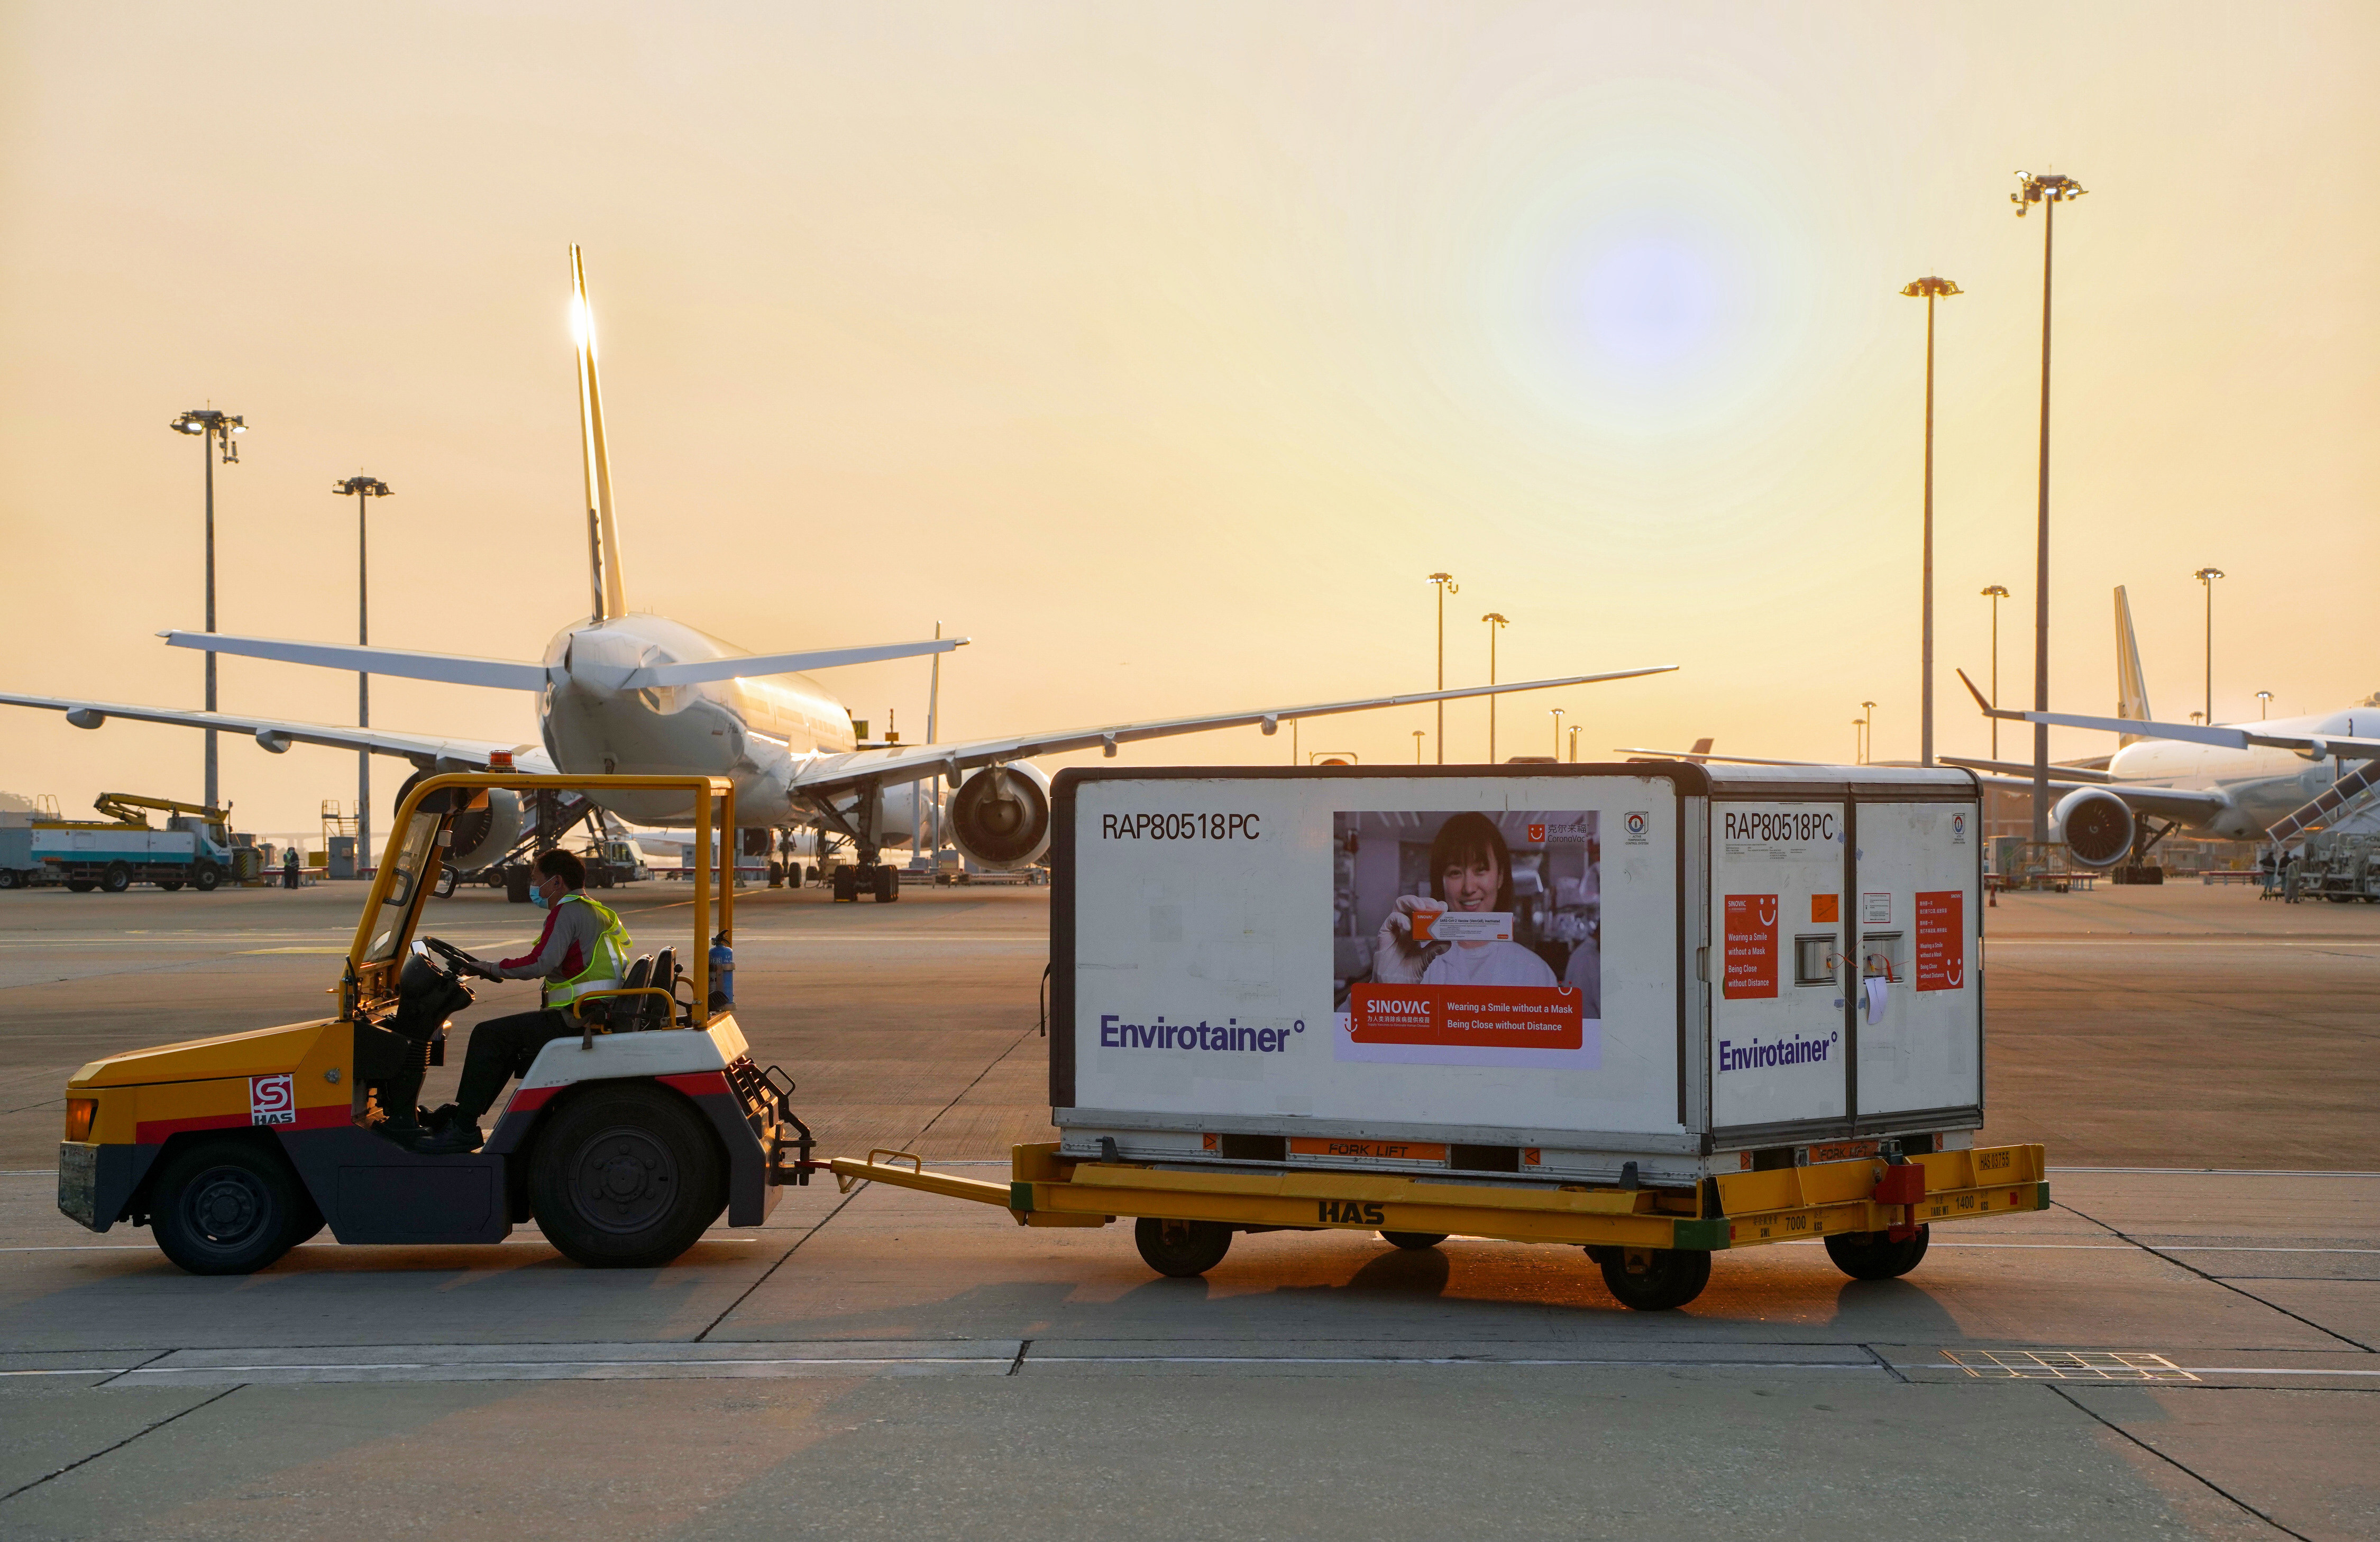 Containers carrying Sinovac’s Covid-19 vaccine are unloaded from a Cathay Pacific plane at the Hong Kong International Airport on February 19. Photo: Handout